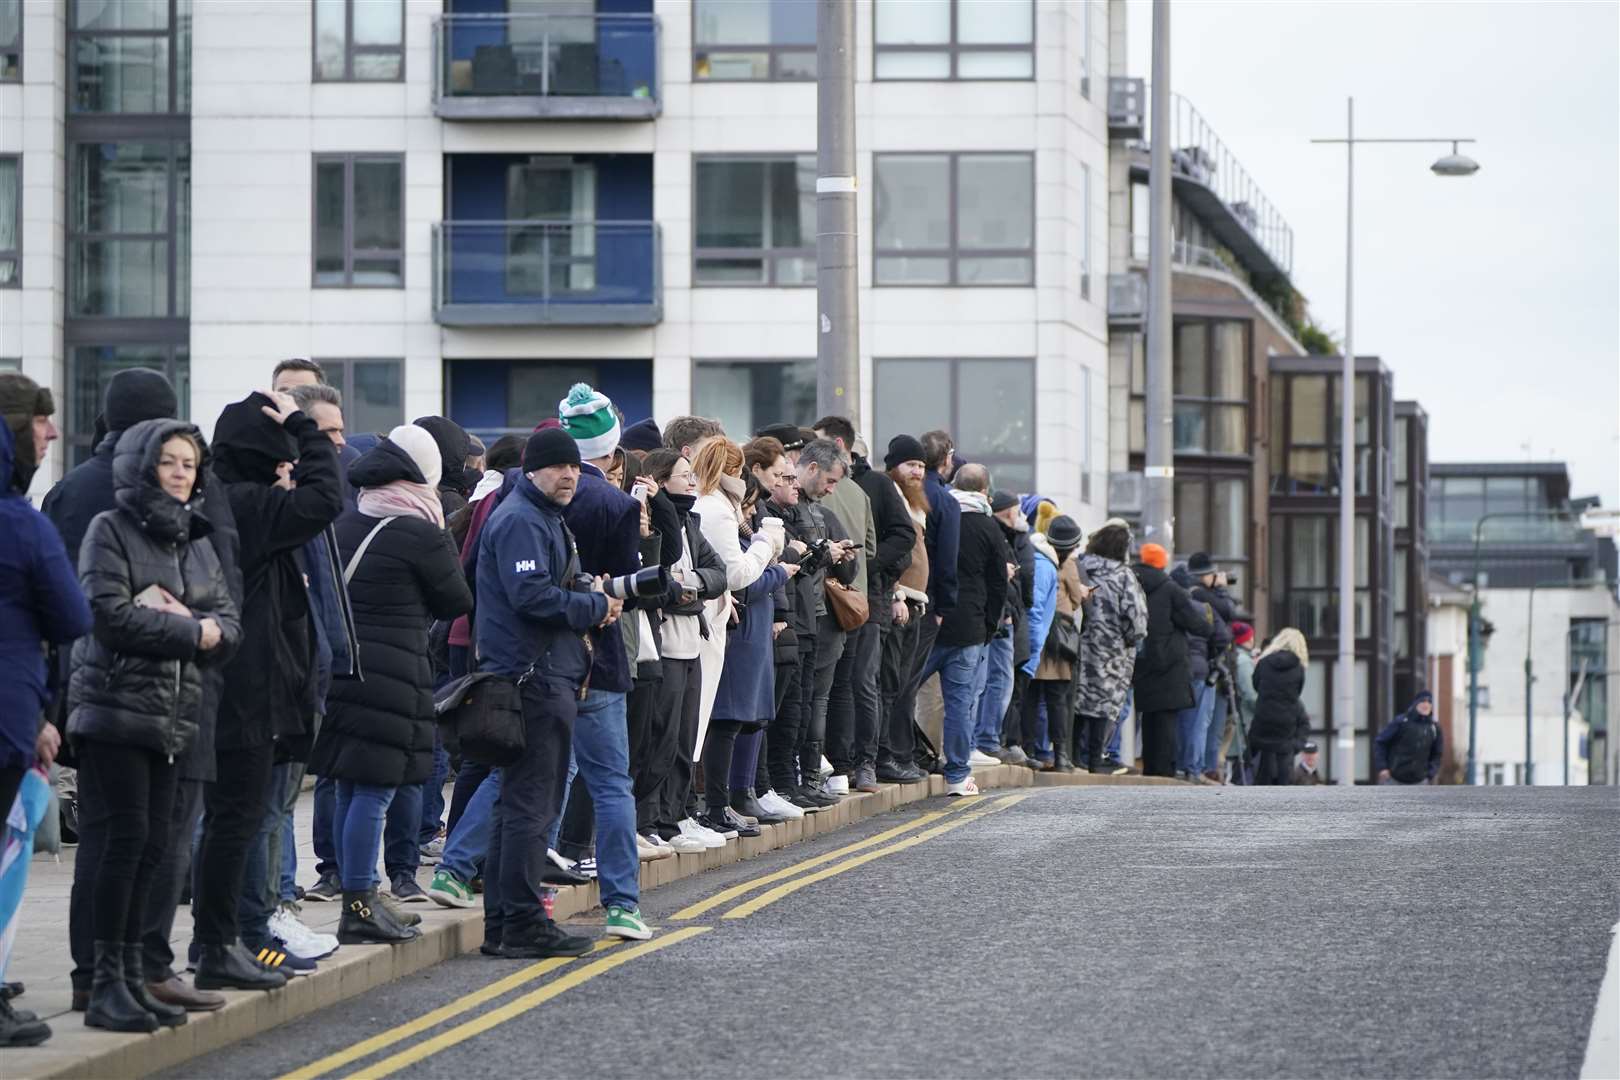 Crowds lined the streets by Dublin Grand Canal (Niall Carson/PA)